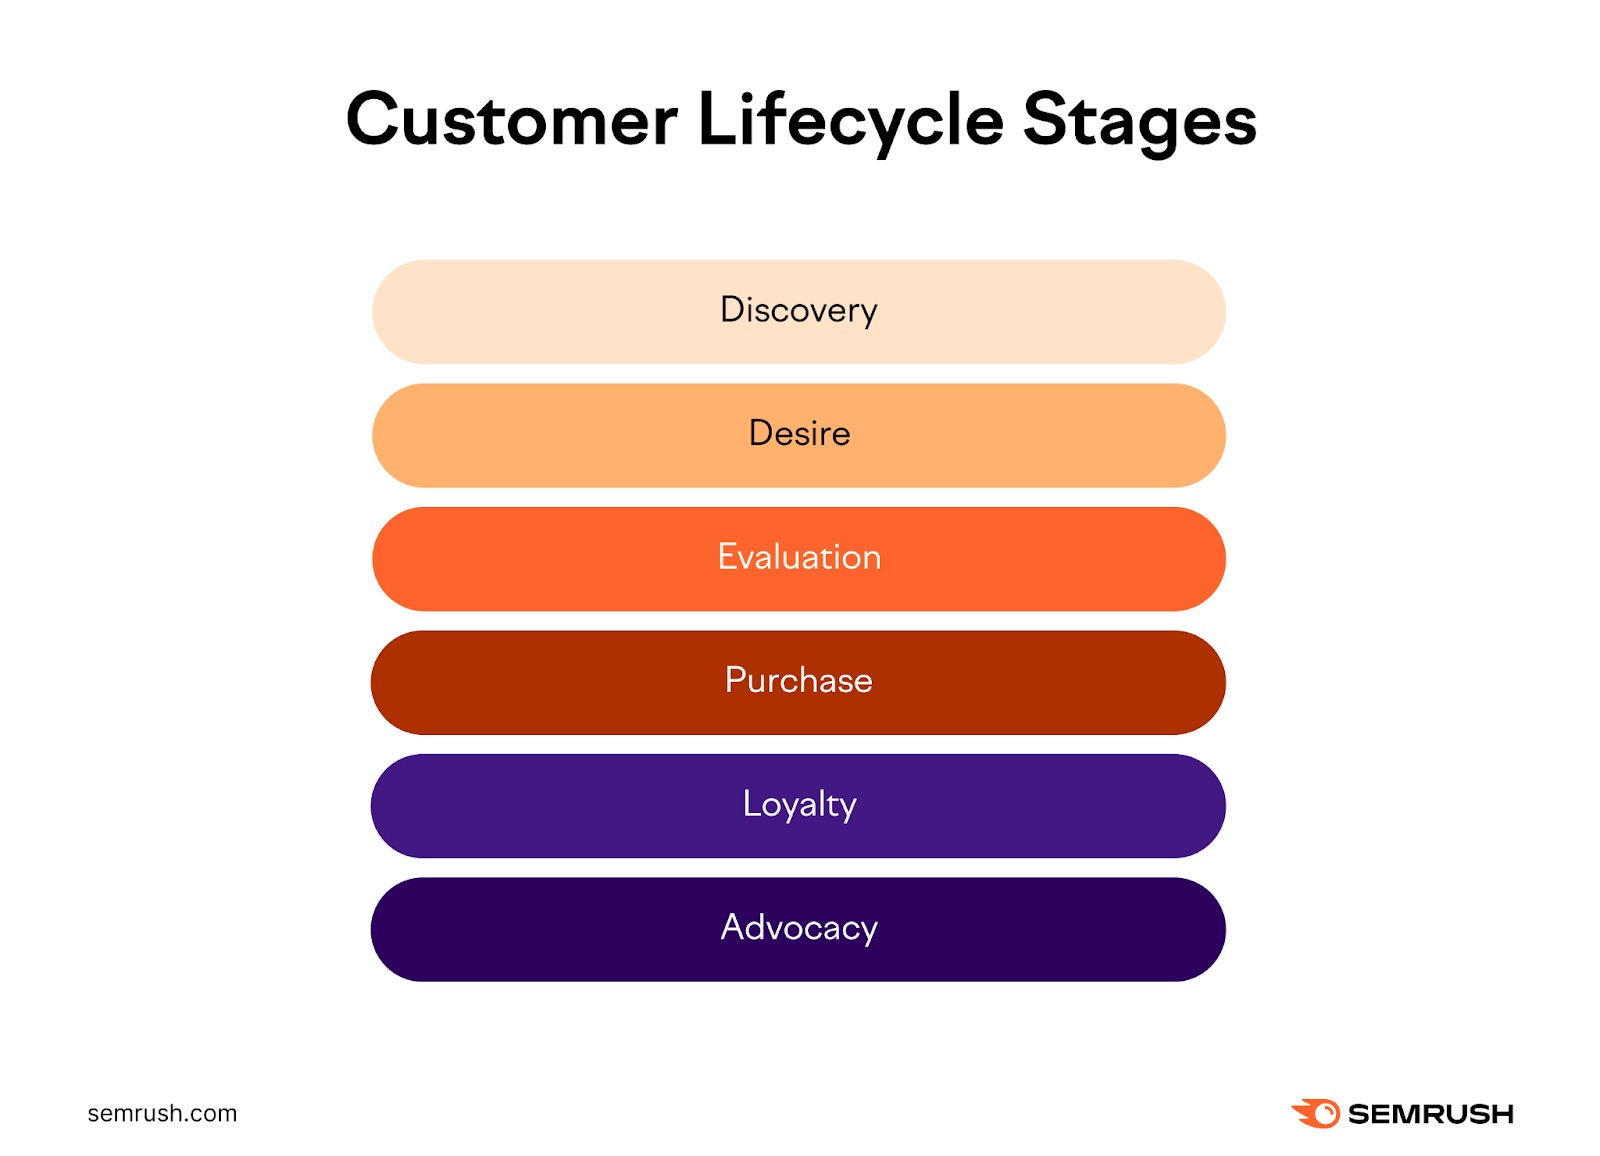 Customer lifecycle stages: discovery, dedication, evaluation, purchase, loyalty, and advocacy